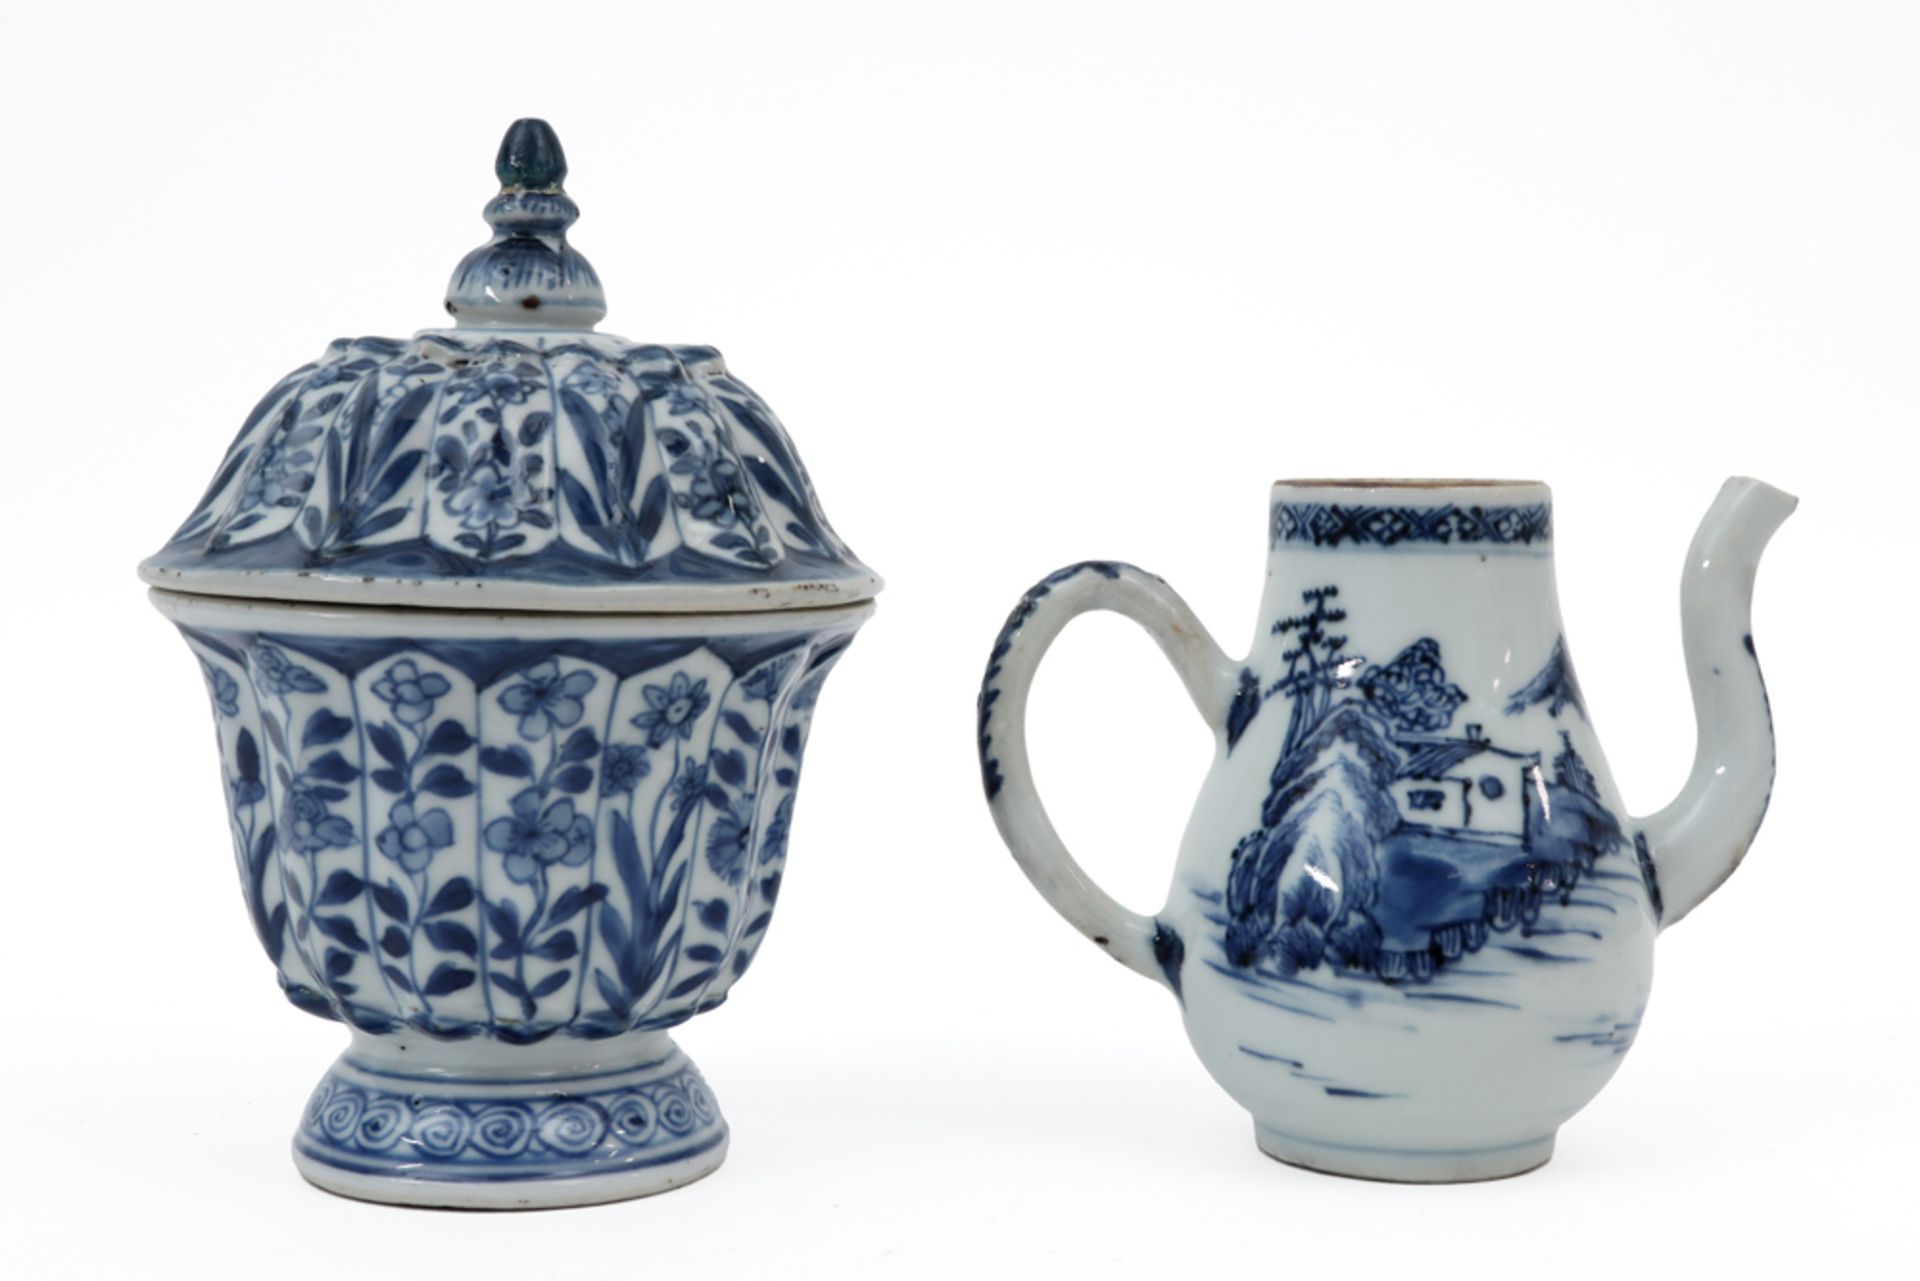 two pieces of 18th Cent. Chinese porcelain with a blue-white dcor : a small jug and a Kang Hsi